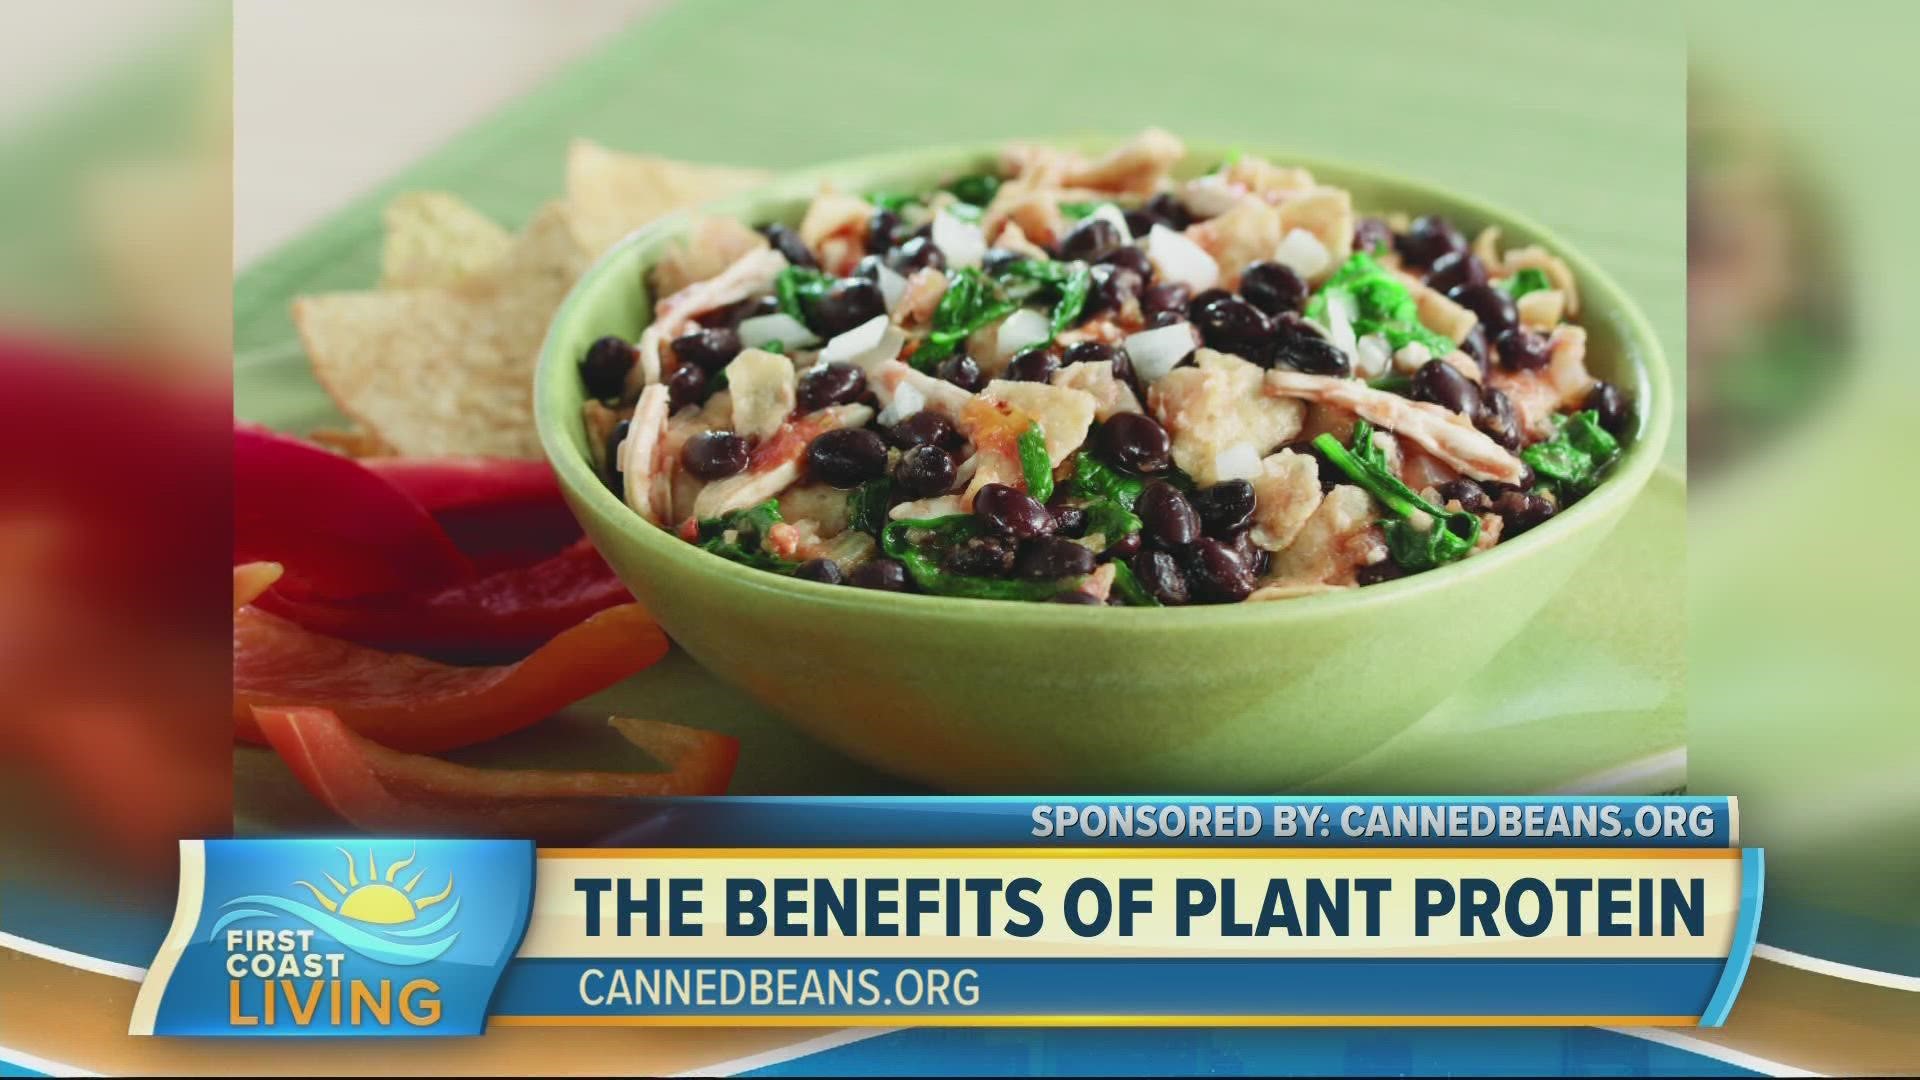 Learn why plant protein, beans specifically, may be a good option for your family meals.